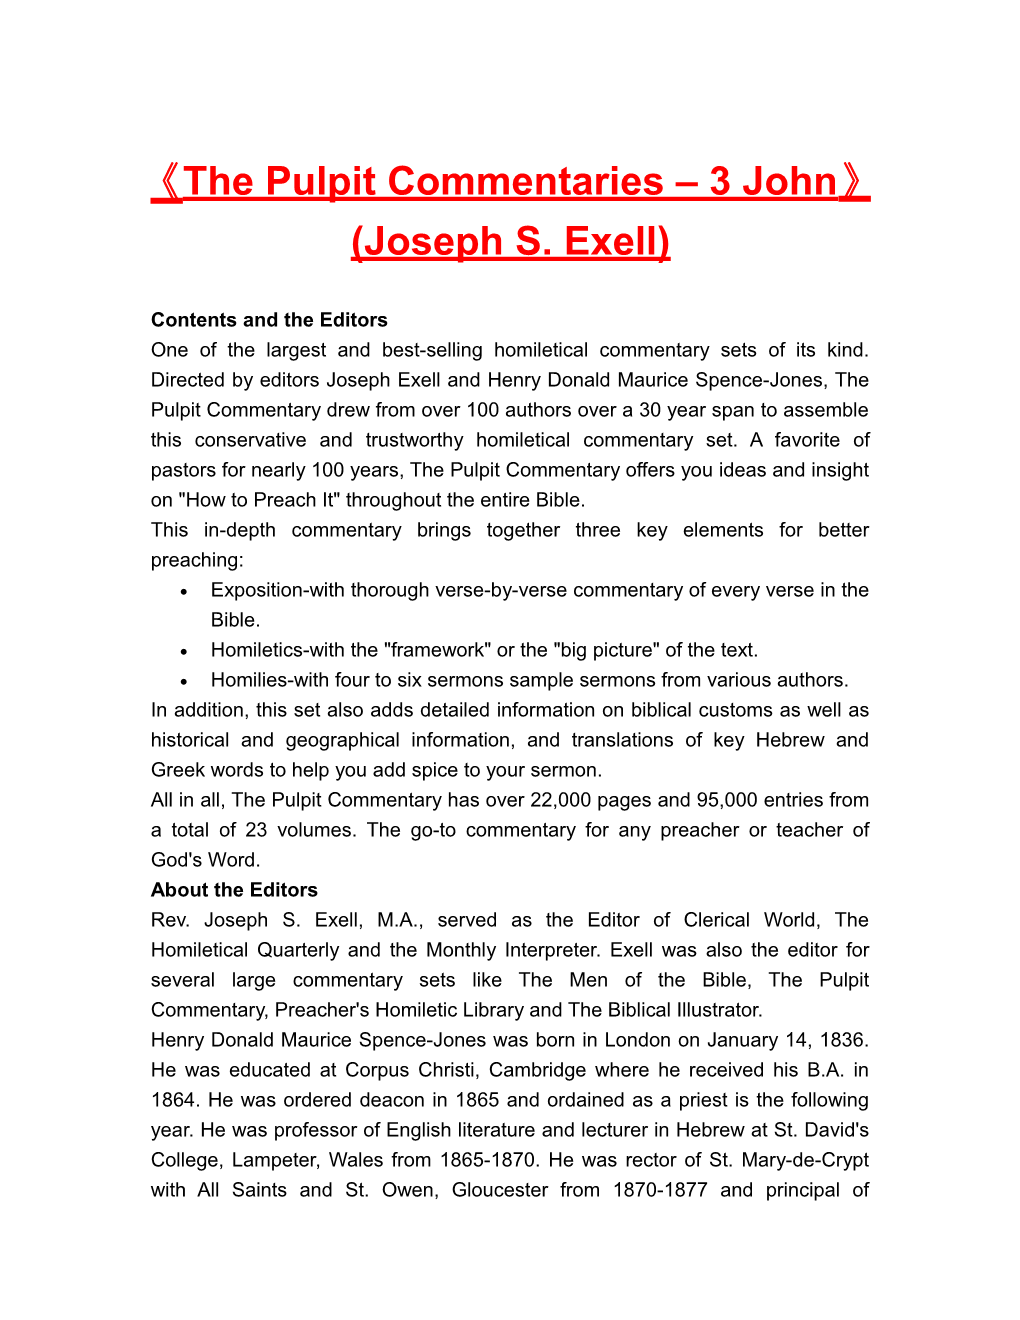 The Pulpit Commentaries 3 John (Joseph S. Exell)